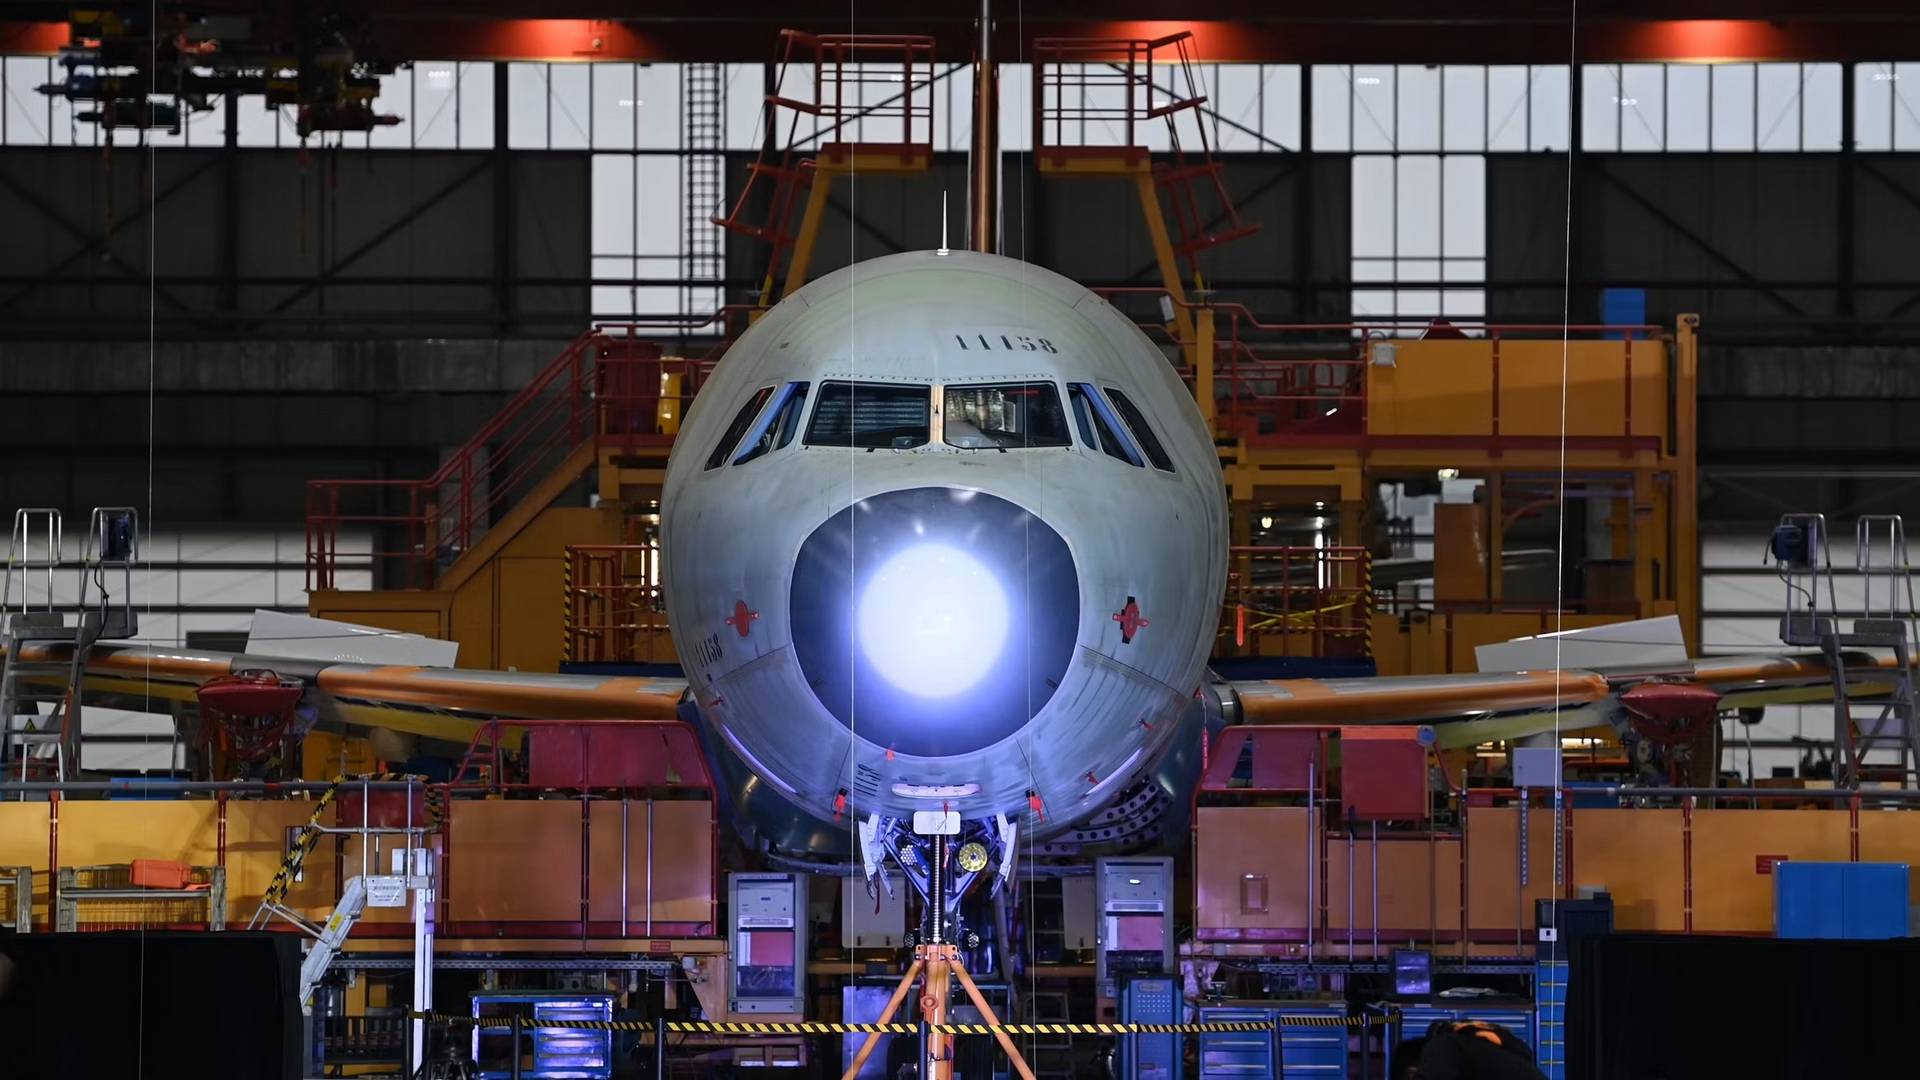 Airbus Builds Second A320neo Assembly Line in Ex-A380 Building